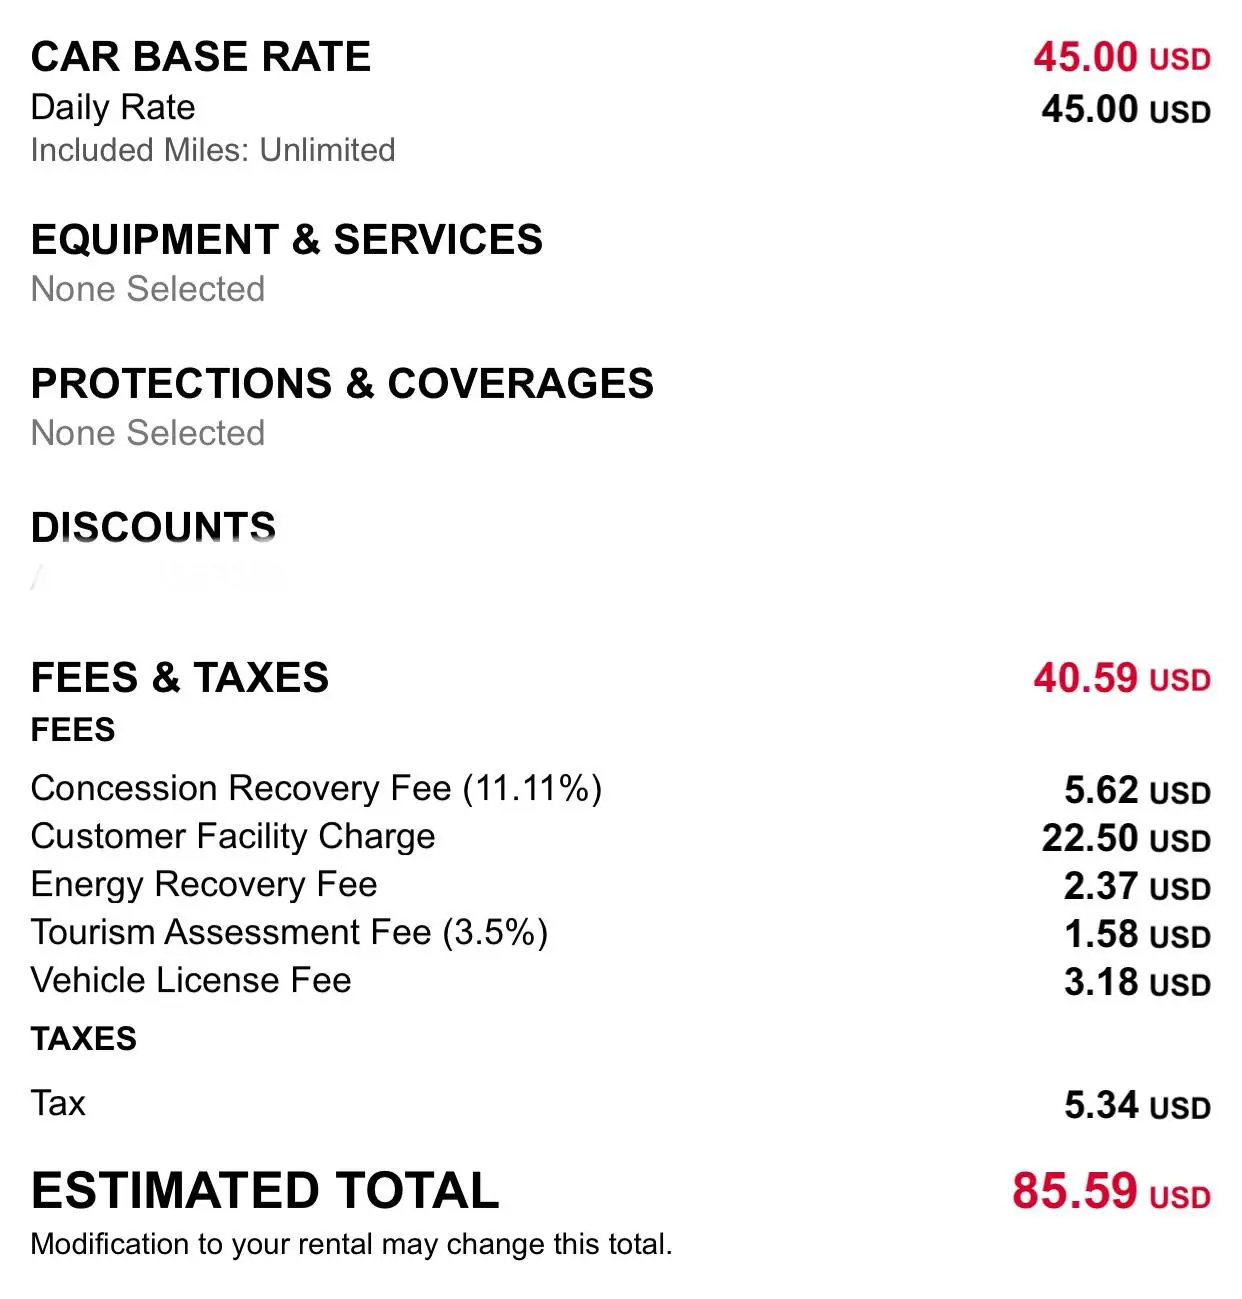 Avis rental car fees and taxes being nearly the same as the daily base ...